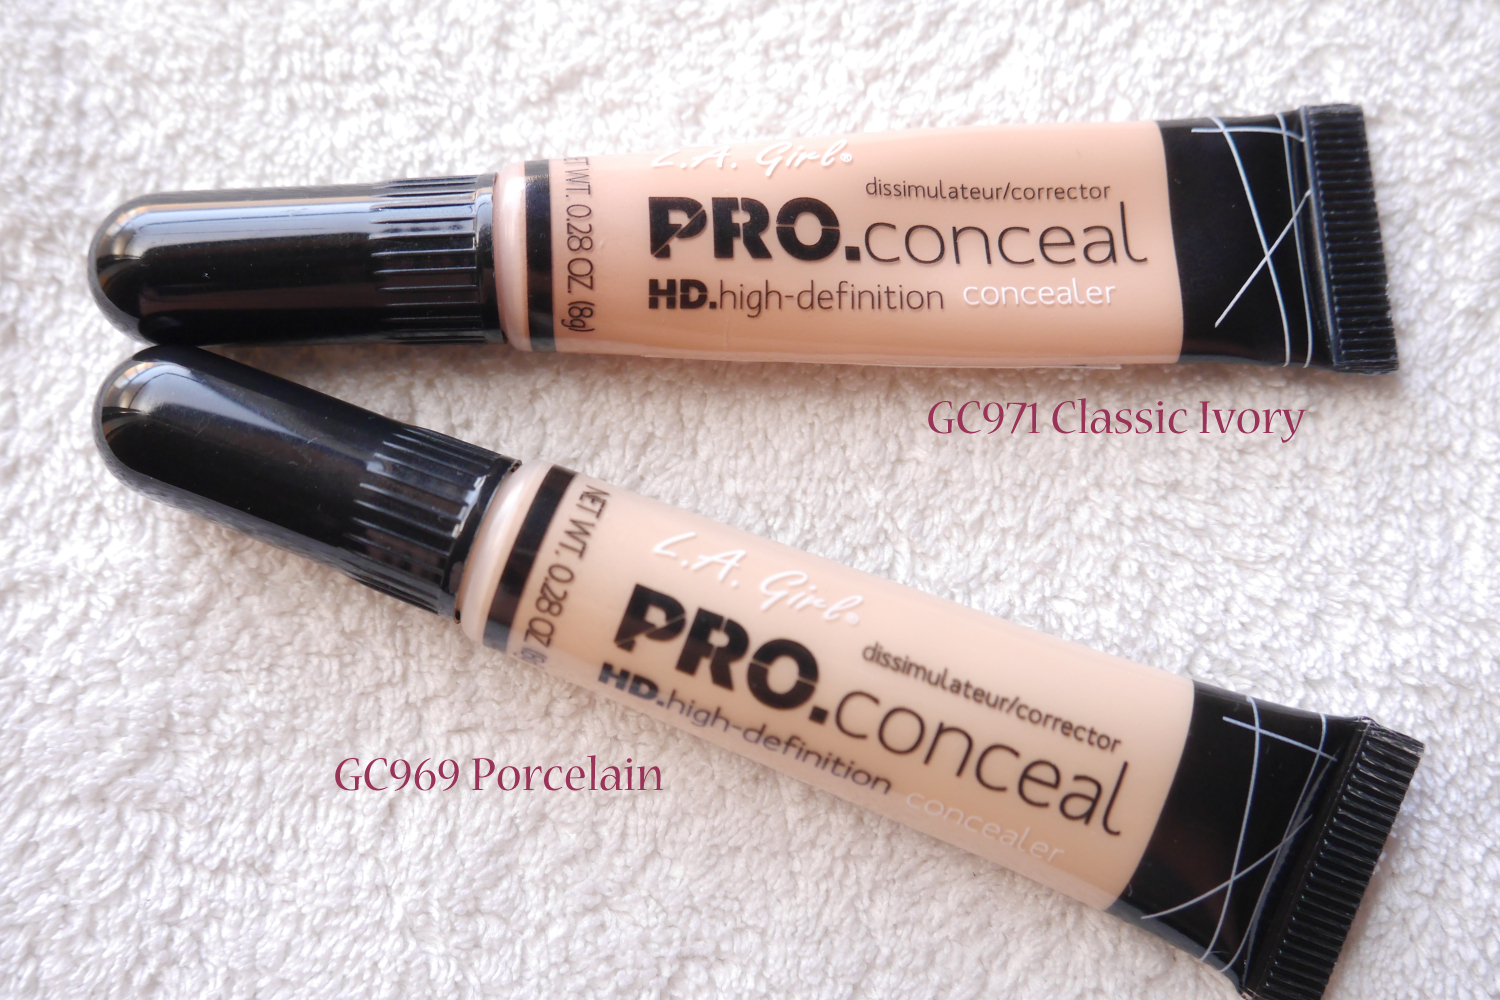 L.A Girl PRO.conceal